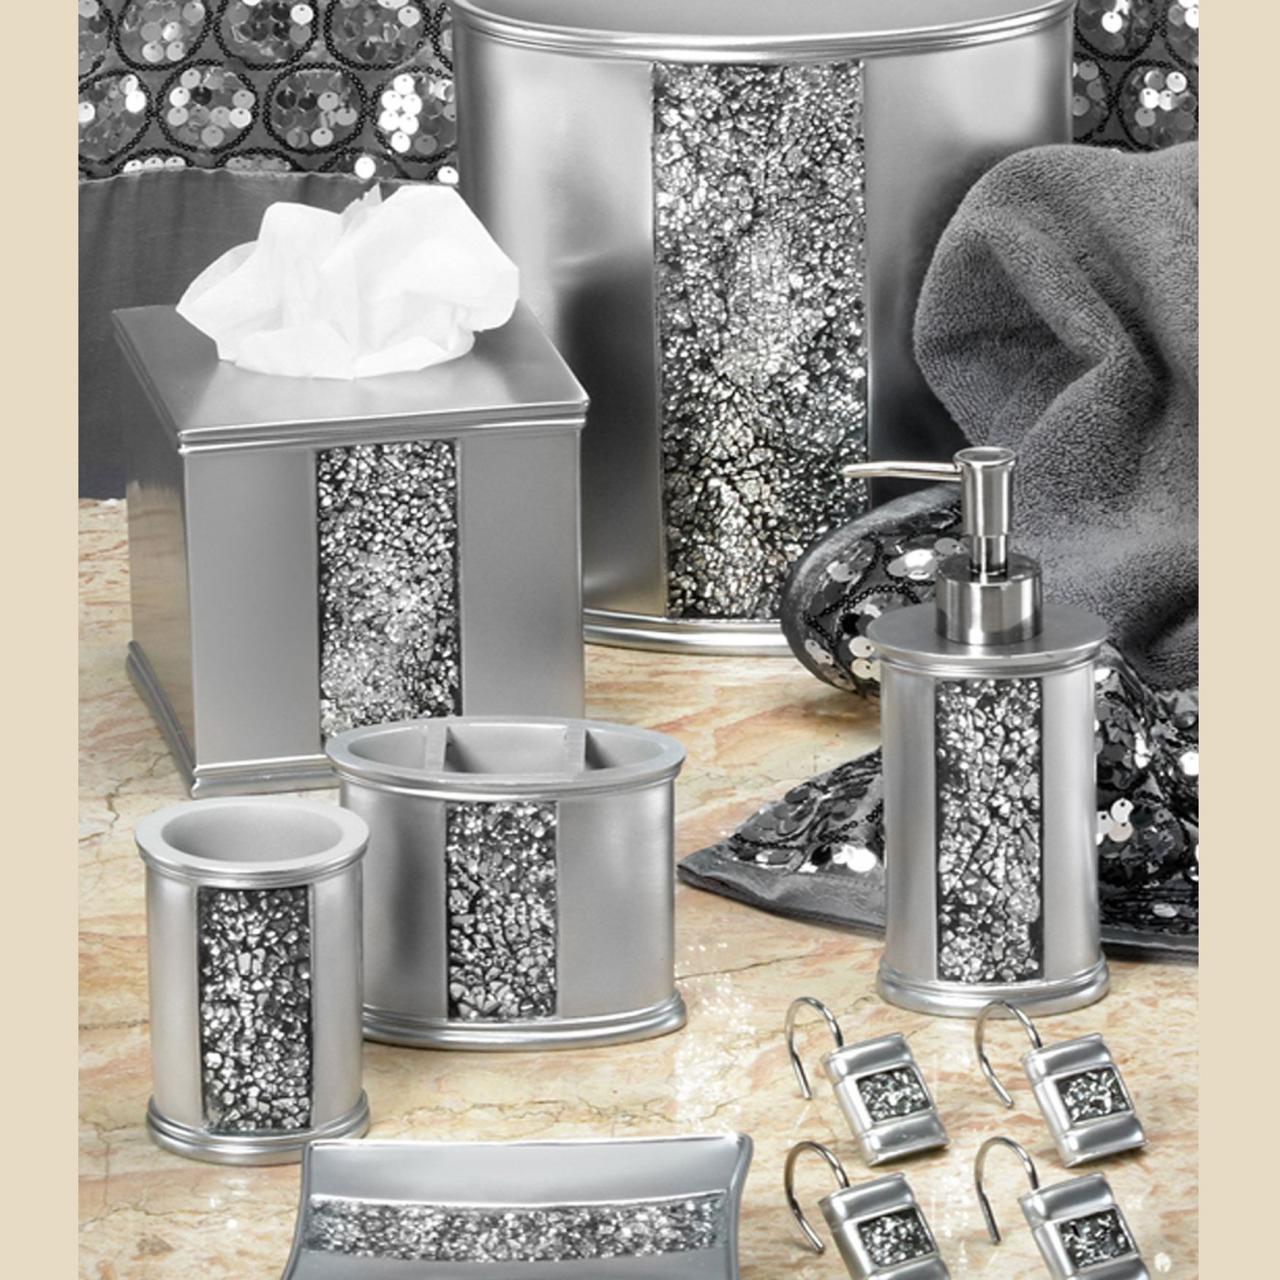 Sinatra Silver Bling Shower Curtain and Bath Accessories in 2020